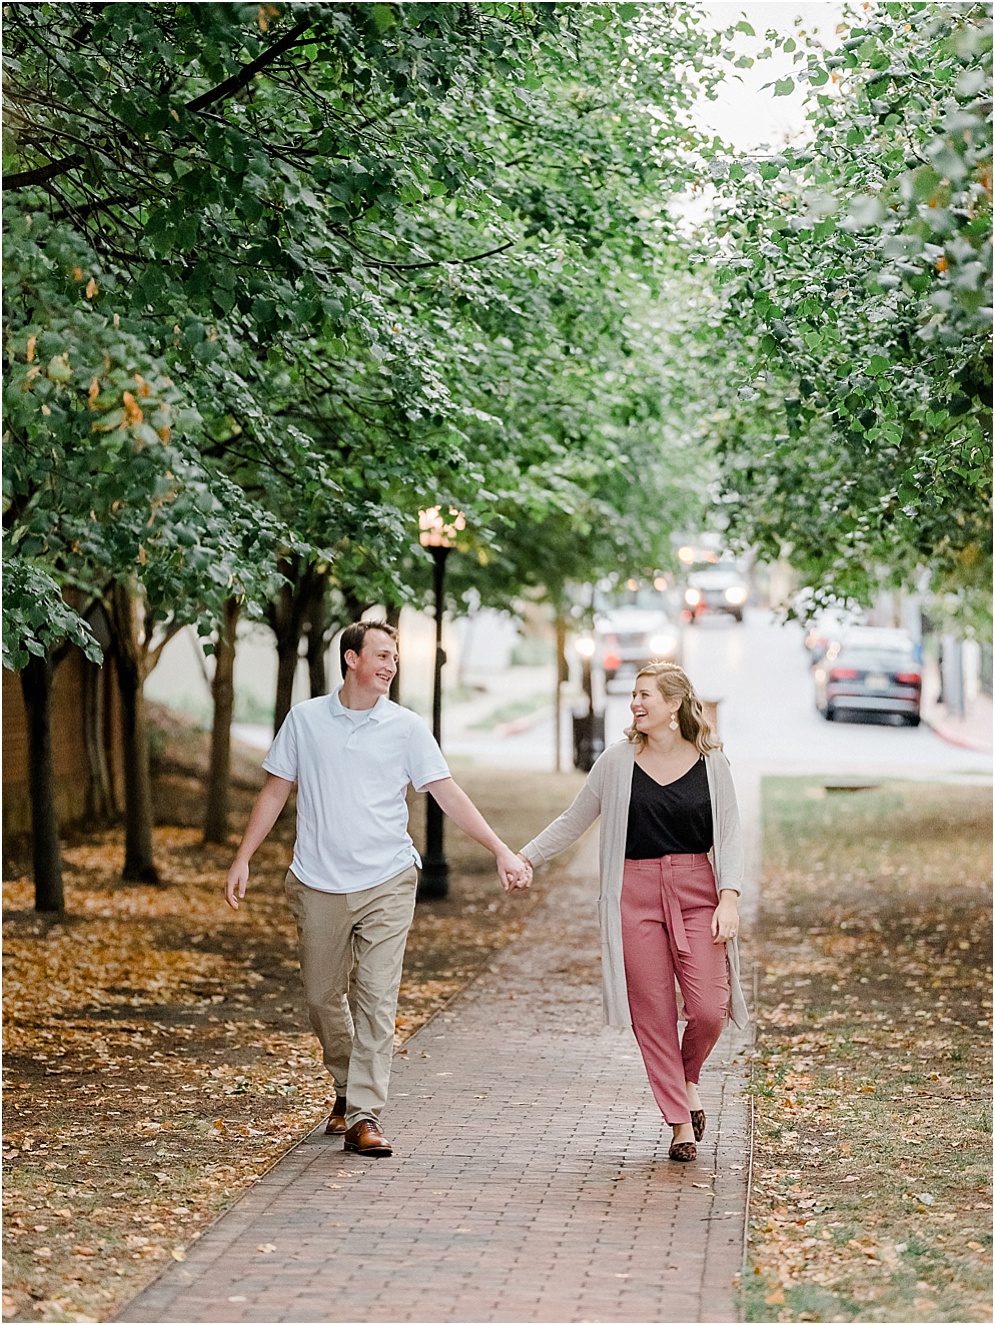 A playful engagement session in Downtown Annapolis